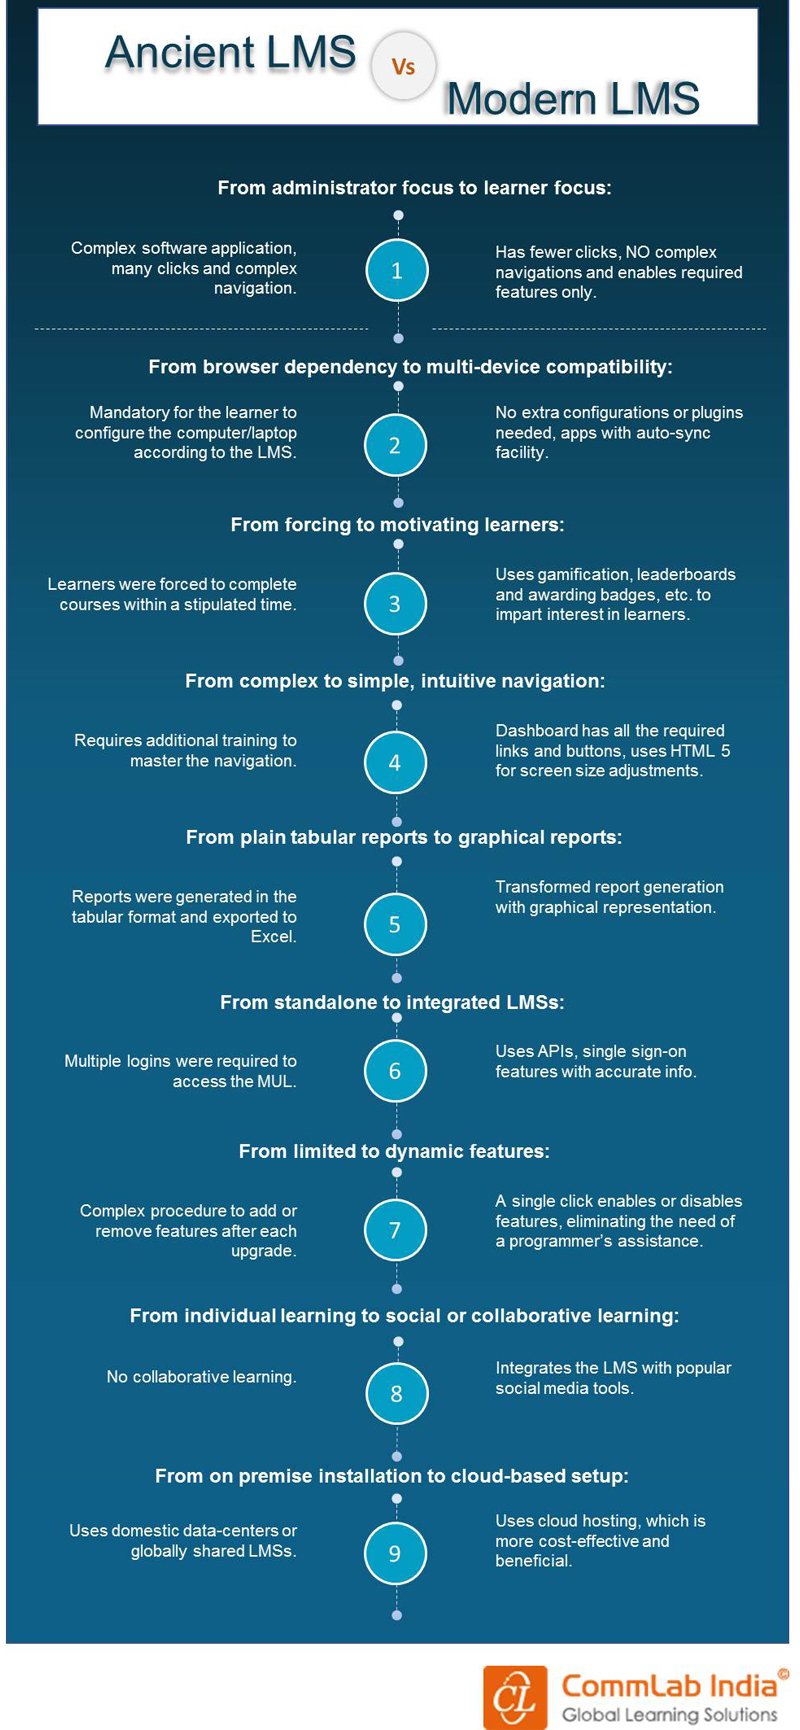 Ancient Vs Modern LMSs: A Comparison [Infographic]